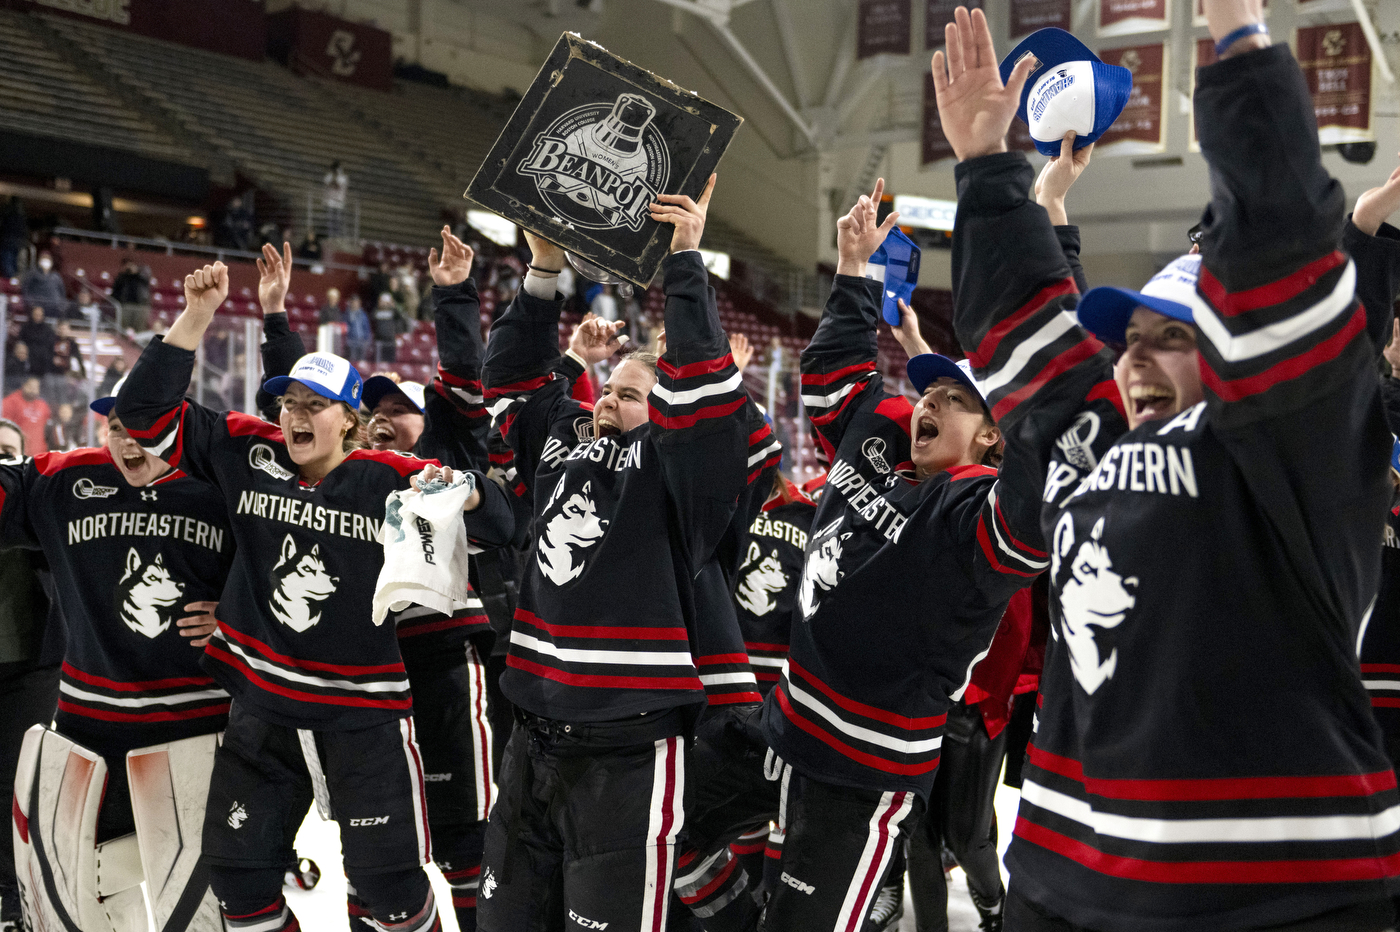 A line of players hold their hands up in celebration as one player holds the Beanpot trophy over her head